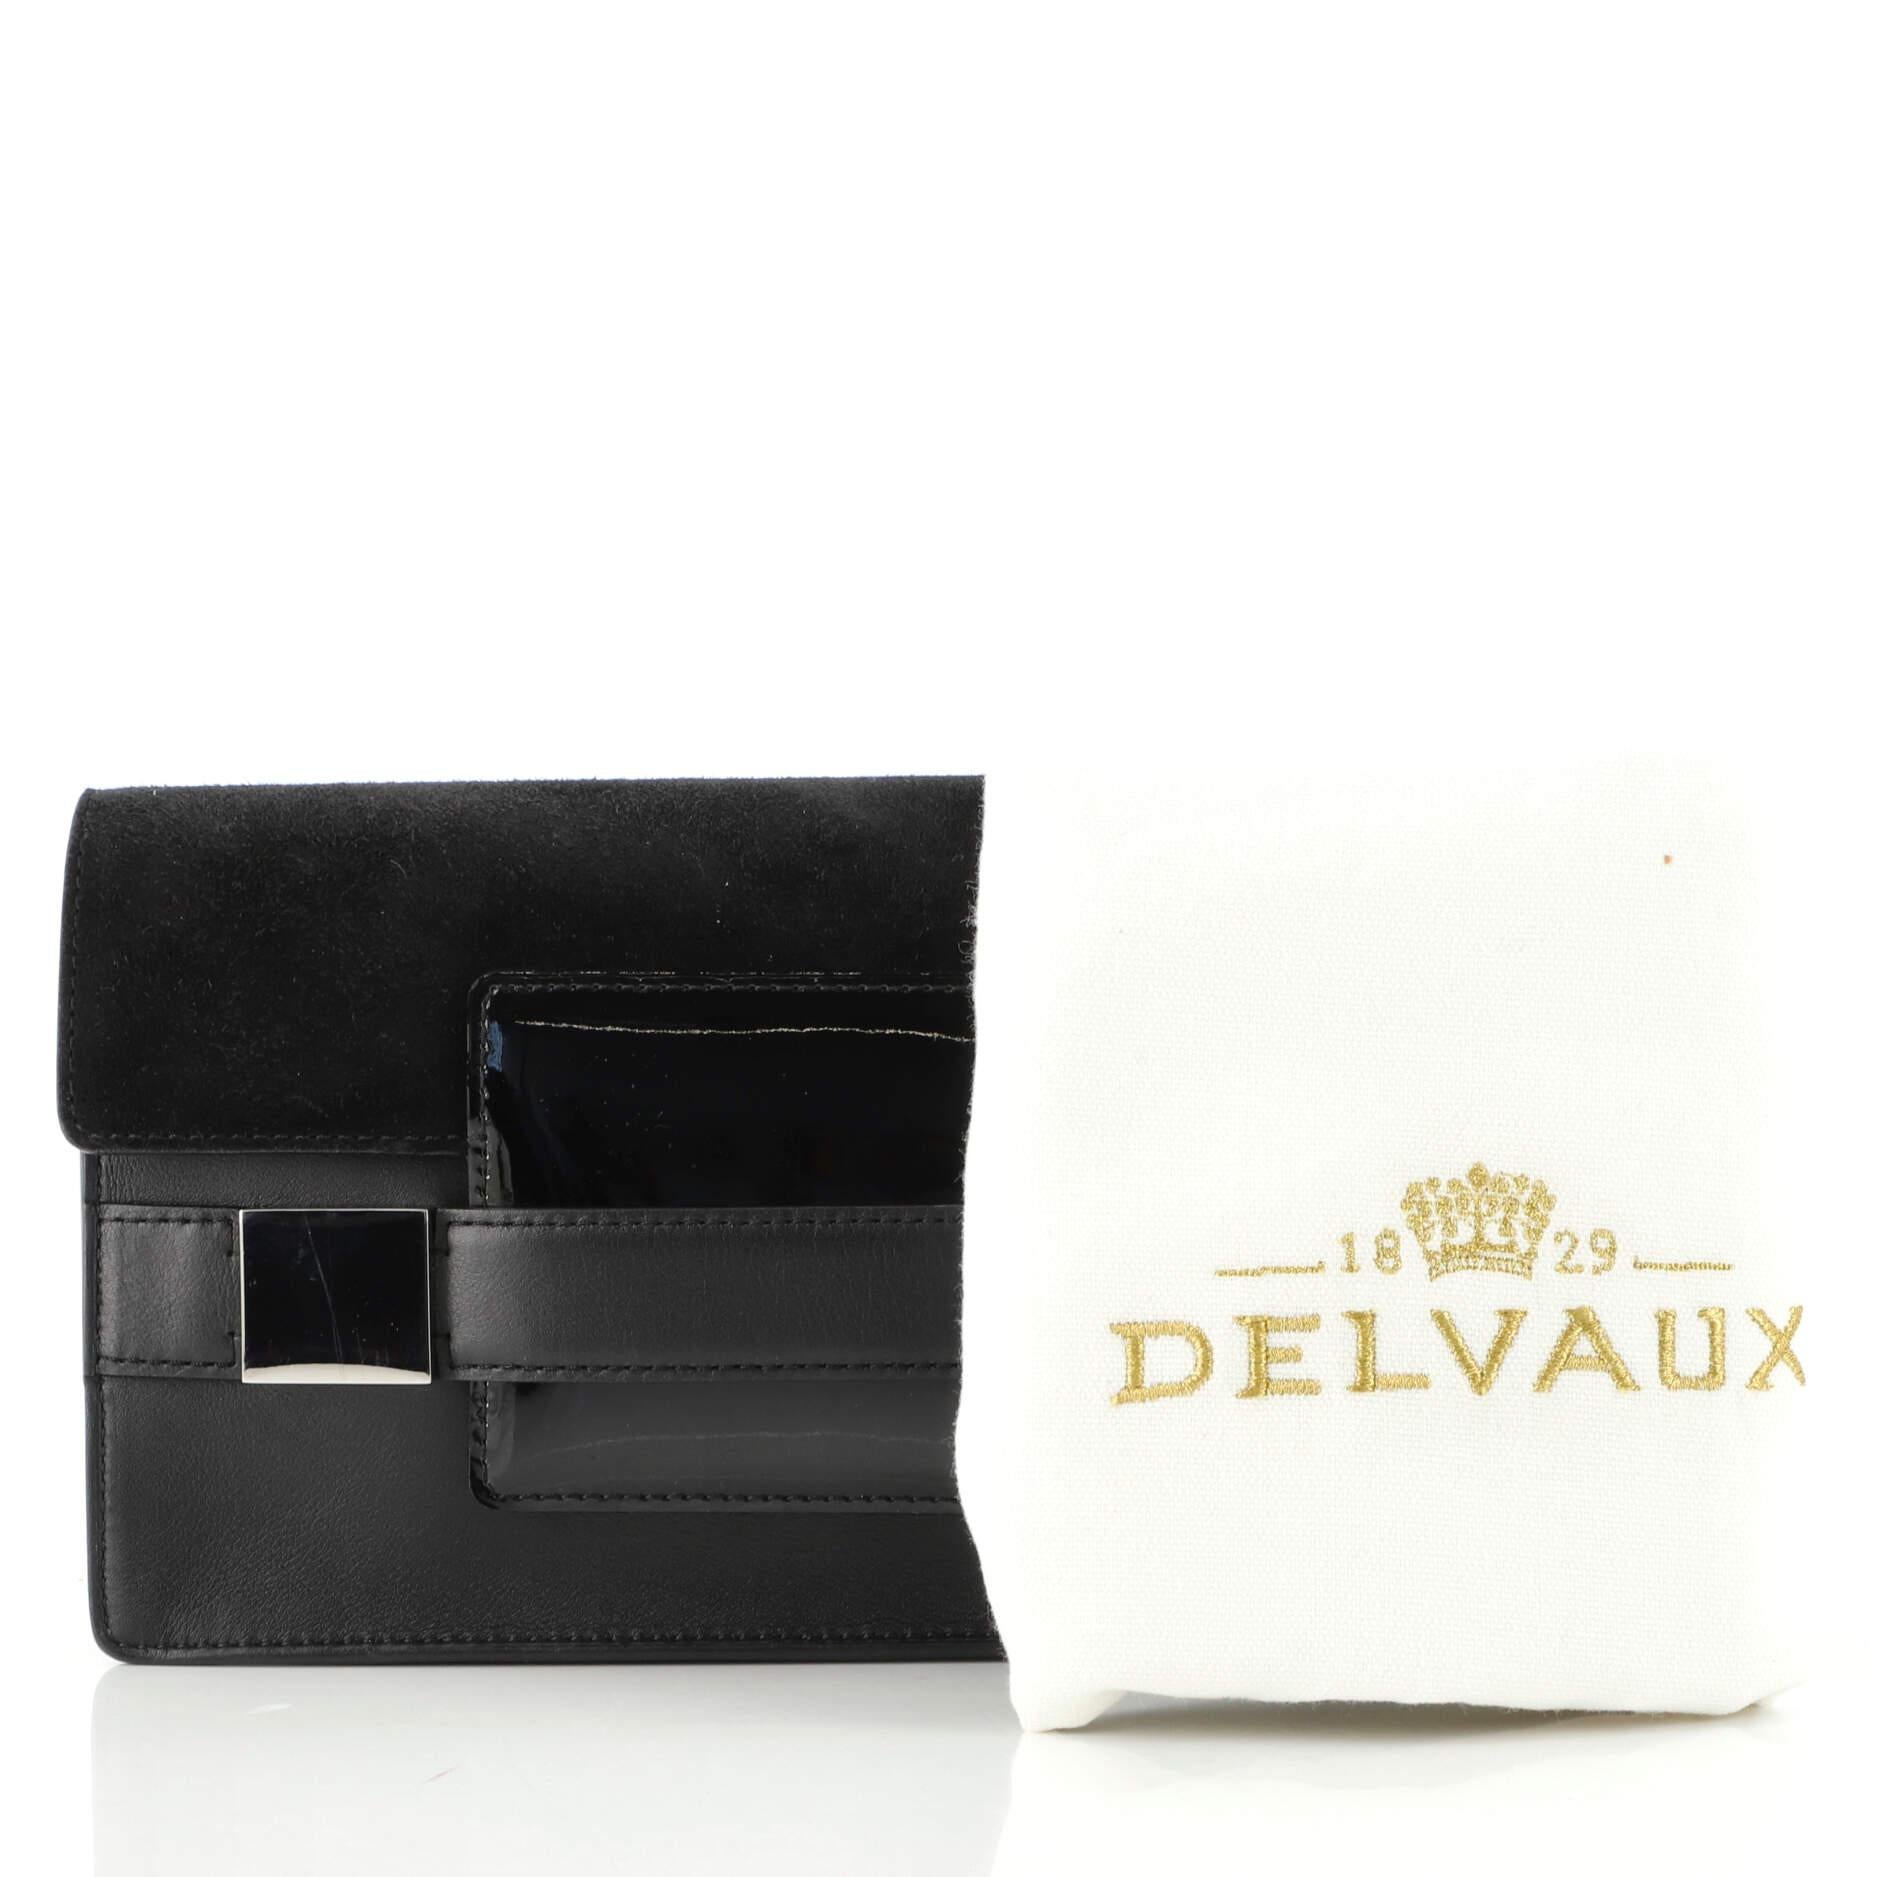 Delvaux Madame - For Sale on 1stDibs | delvaux madame bag, madame delvaux,  madame handbags